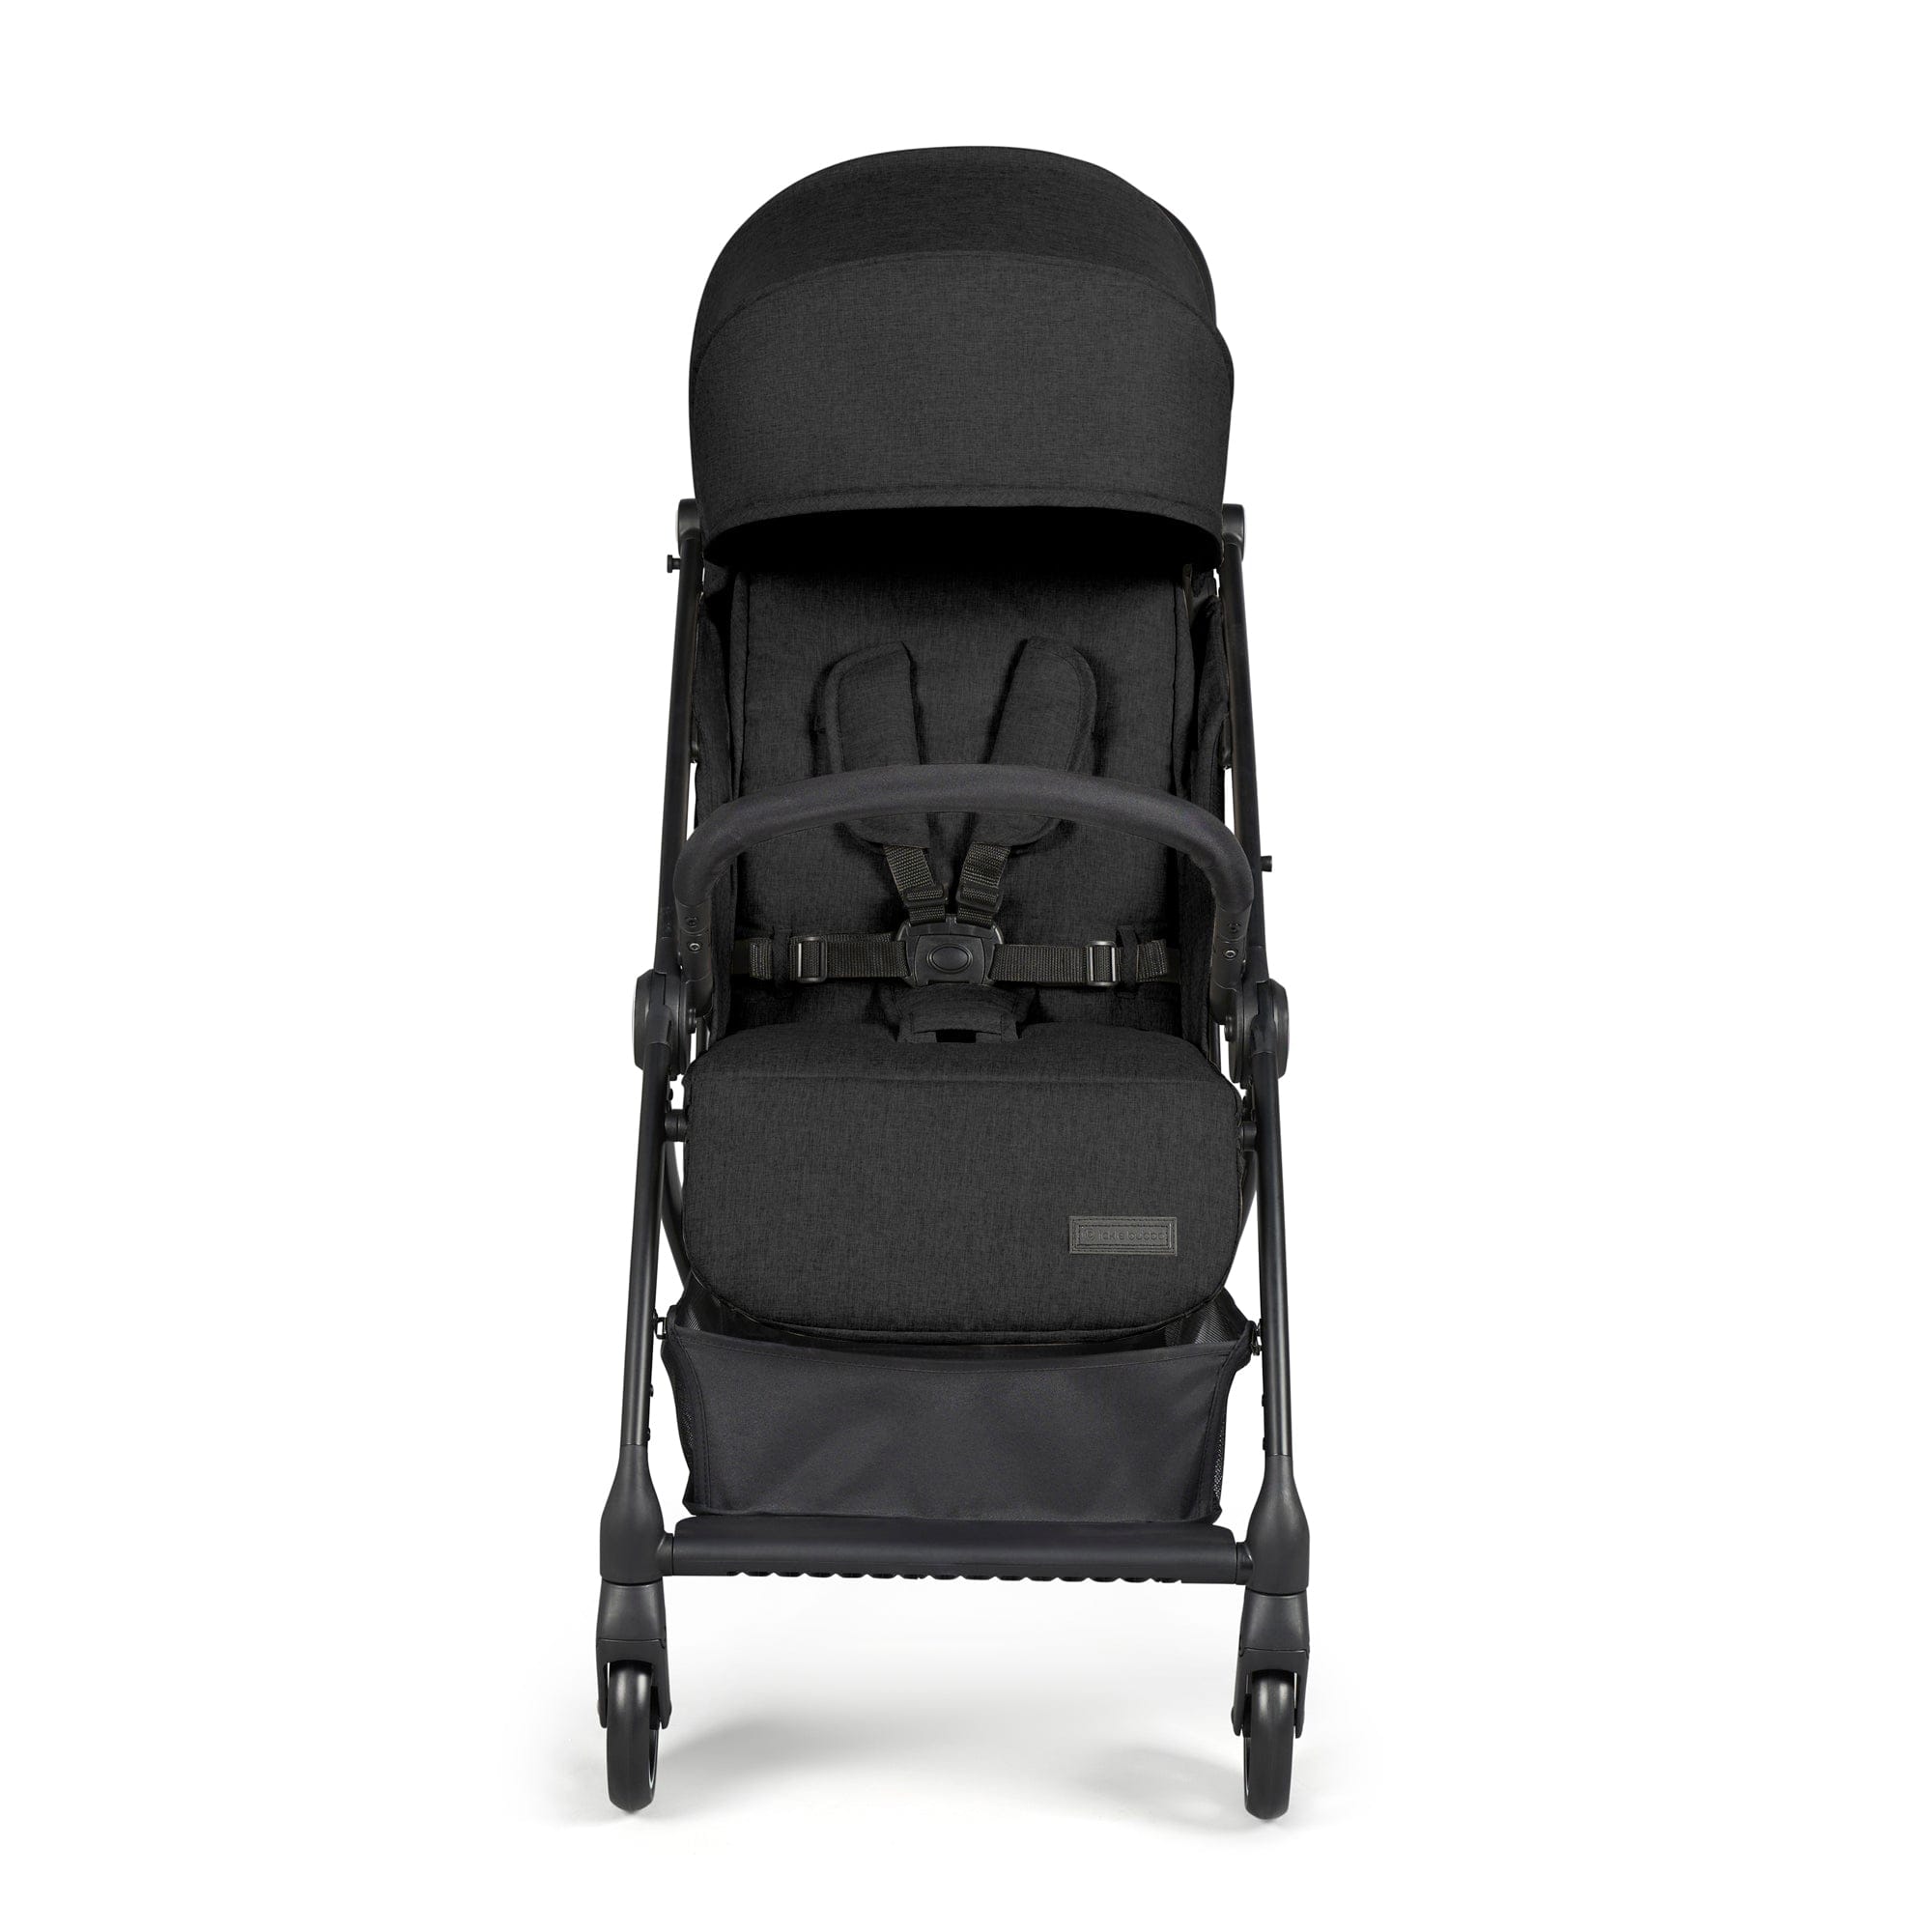 Ickle Bubba baby pushchairs Ickle Bubba Aries Max Autofold Stroller - Black 15-005-200-001